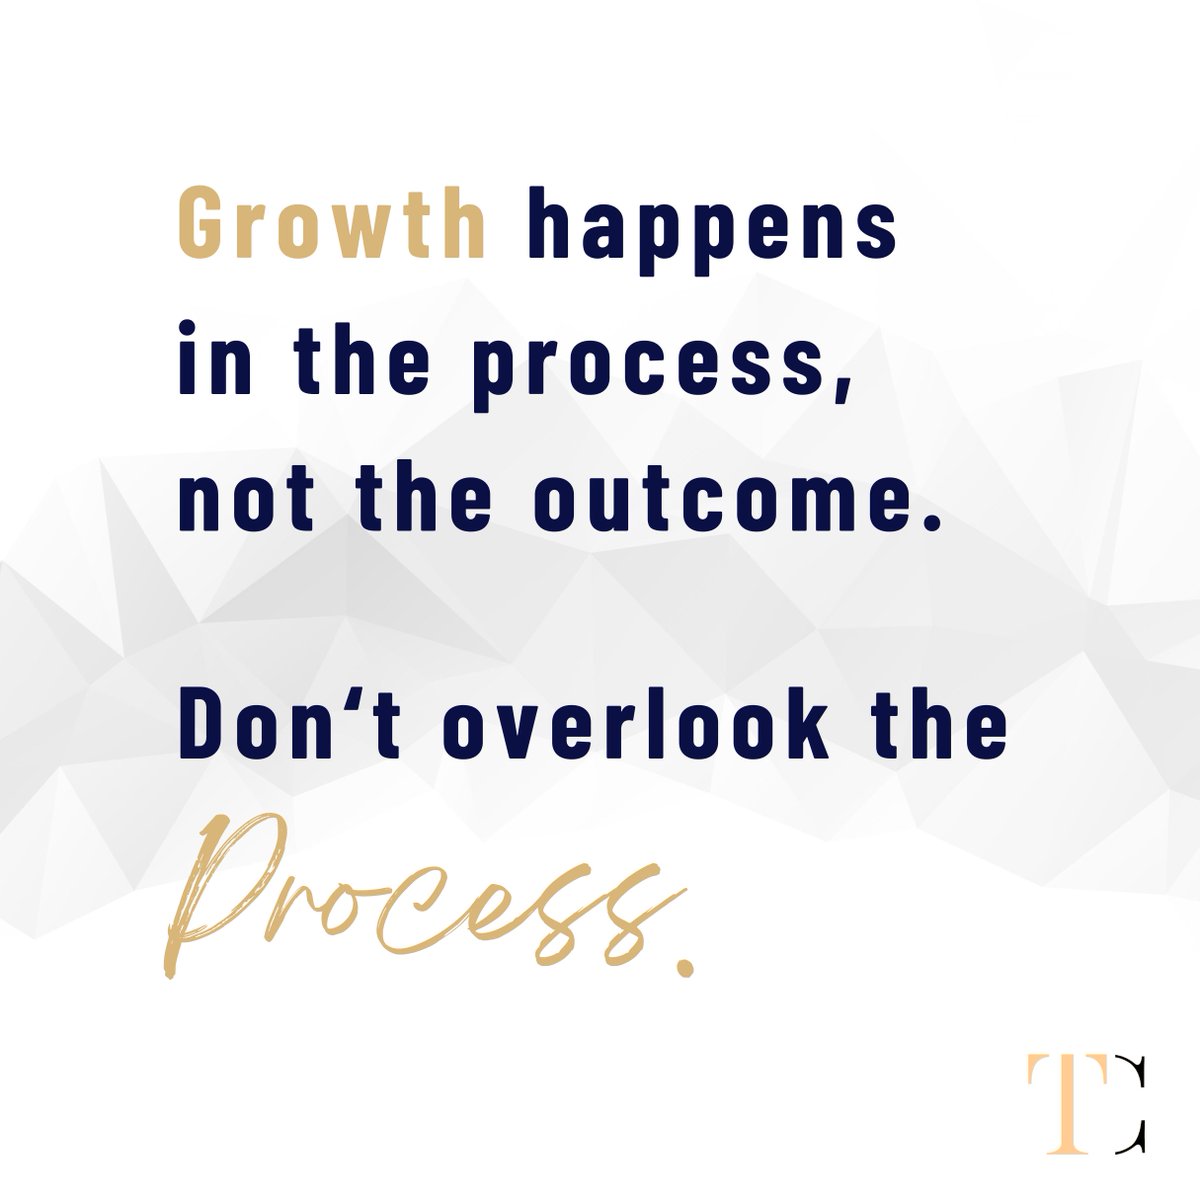 Your growth is determined by who you are when the going gets tough, your discipline when you feel like quitting, and your courage to lean into the uncomfortable. If you're in the process right now, good. It's your opportunity to grow. Tag a friend who needs this encouragement!